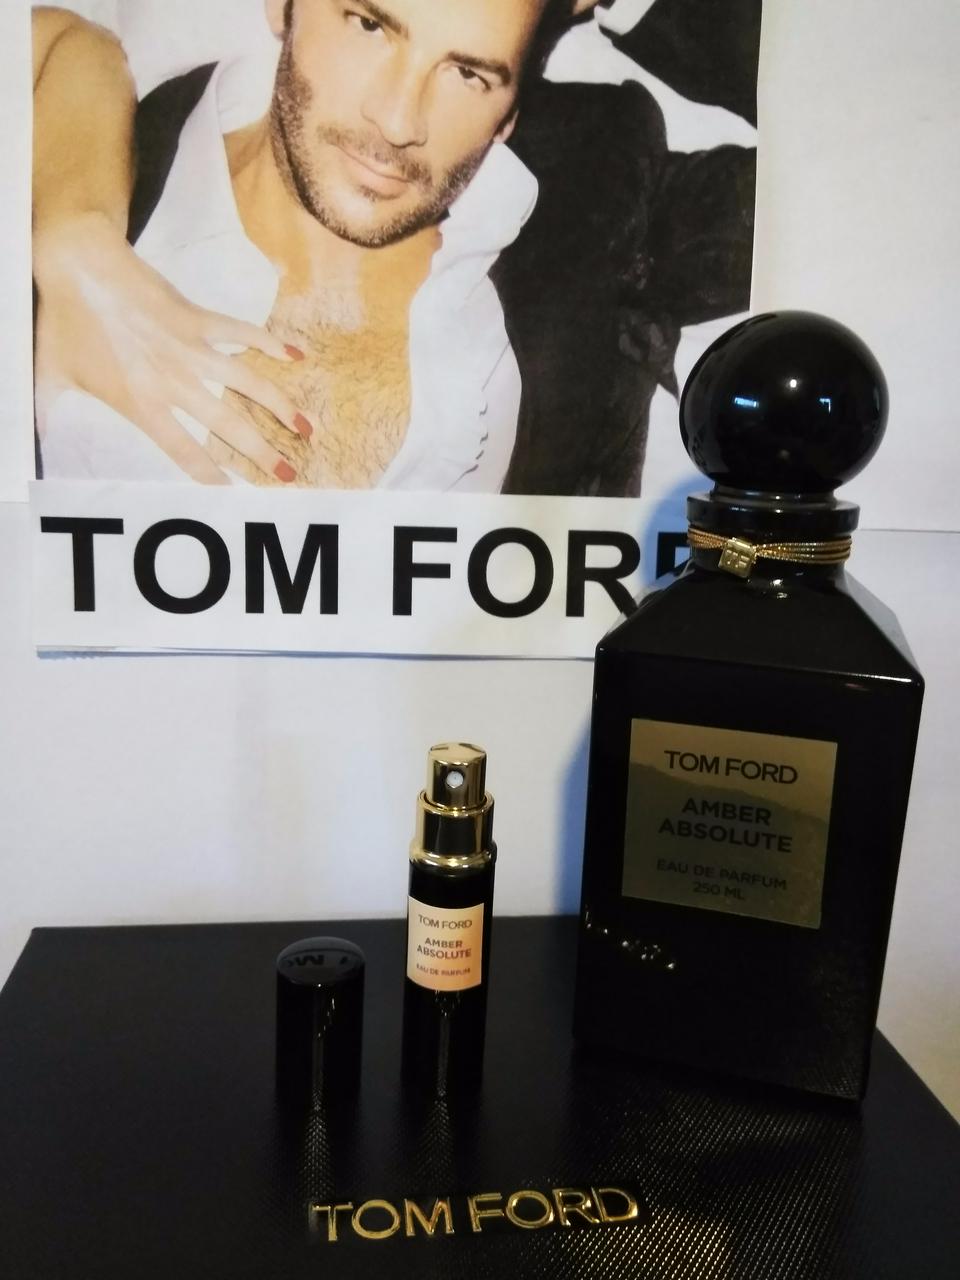 5ml AMBER ABSOLUTE Authentic TOM FORD Perfume Spray Atomizer